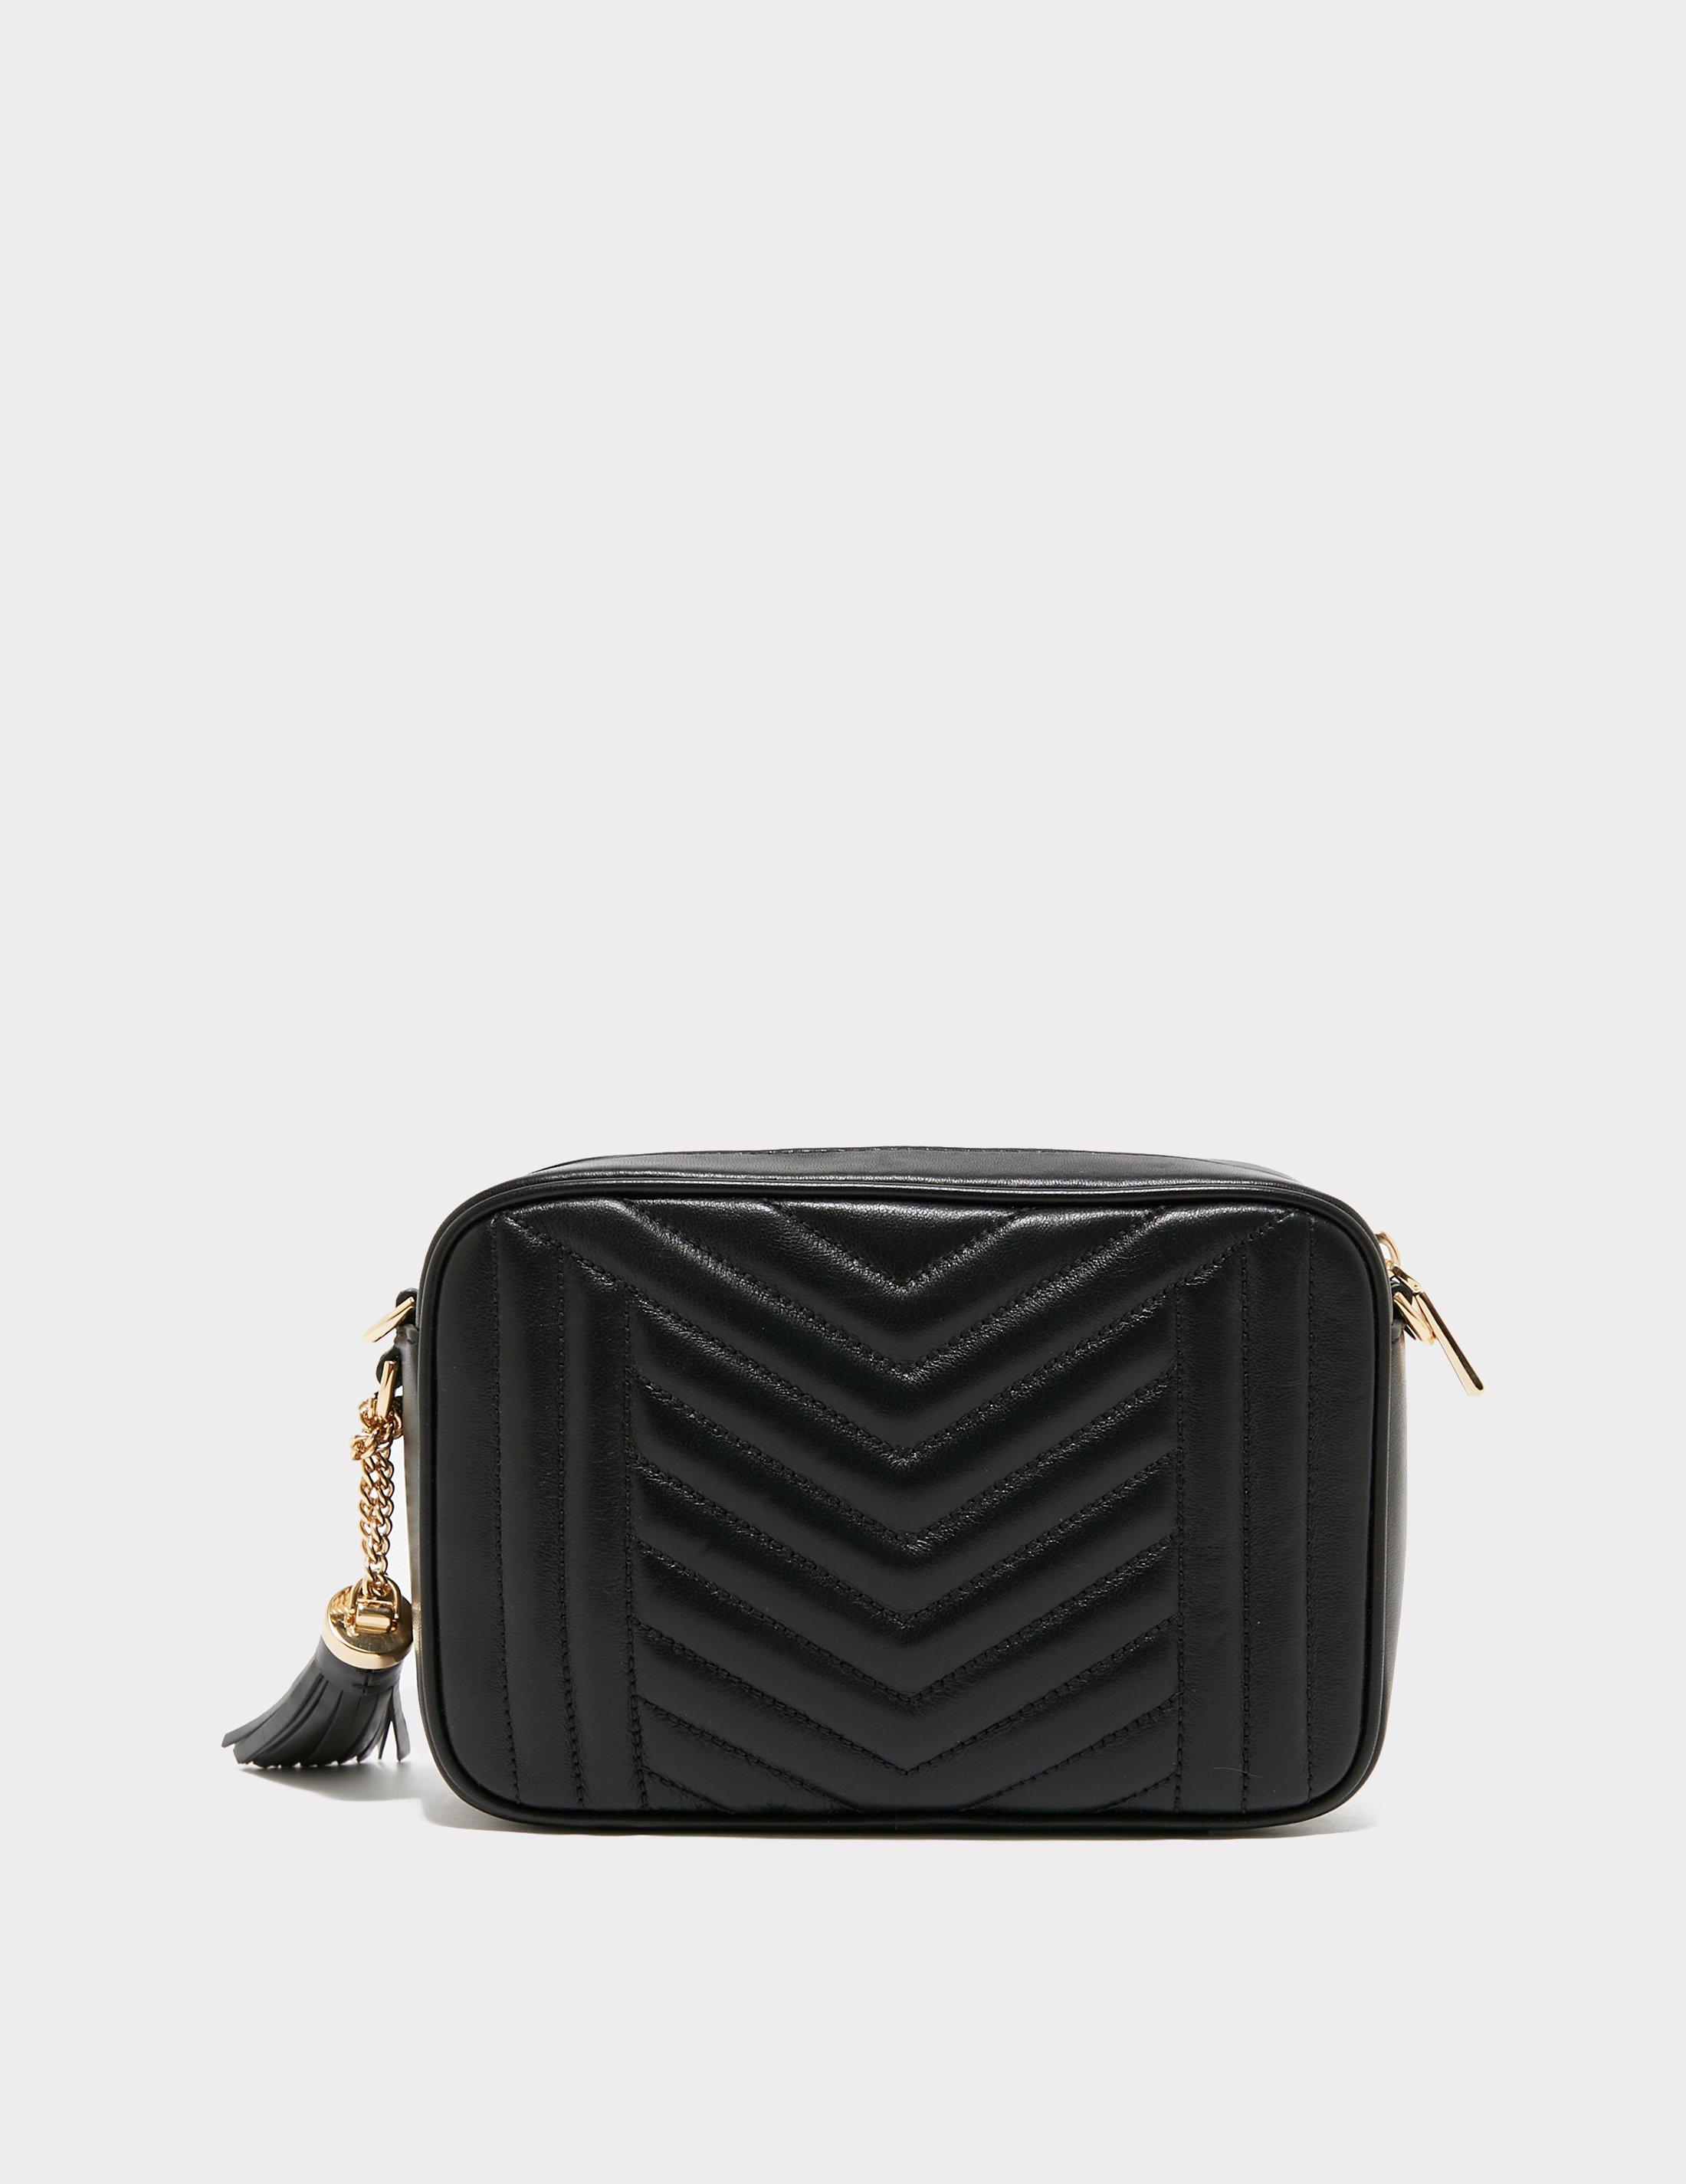 michael kors quilted camera bag